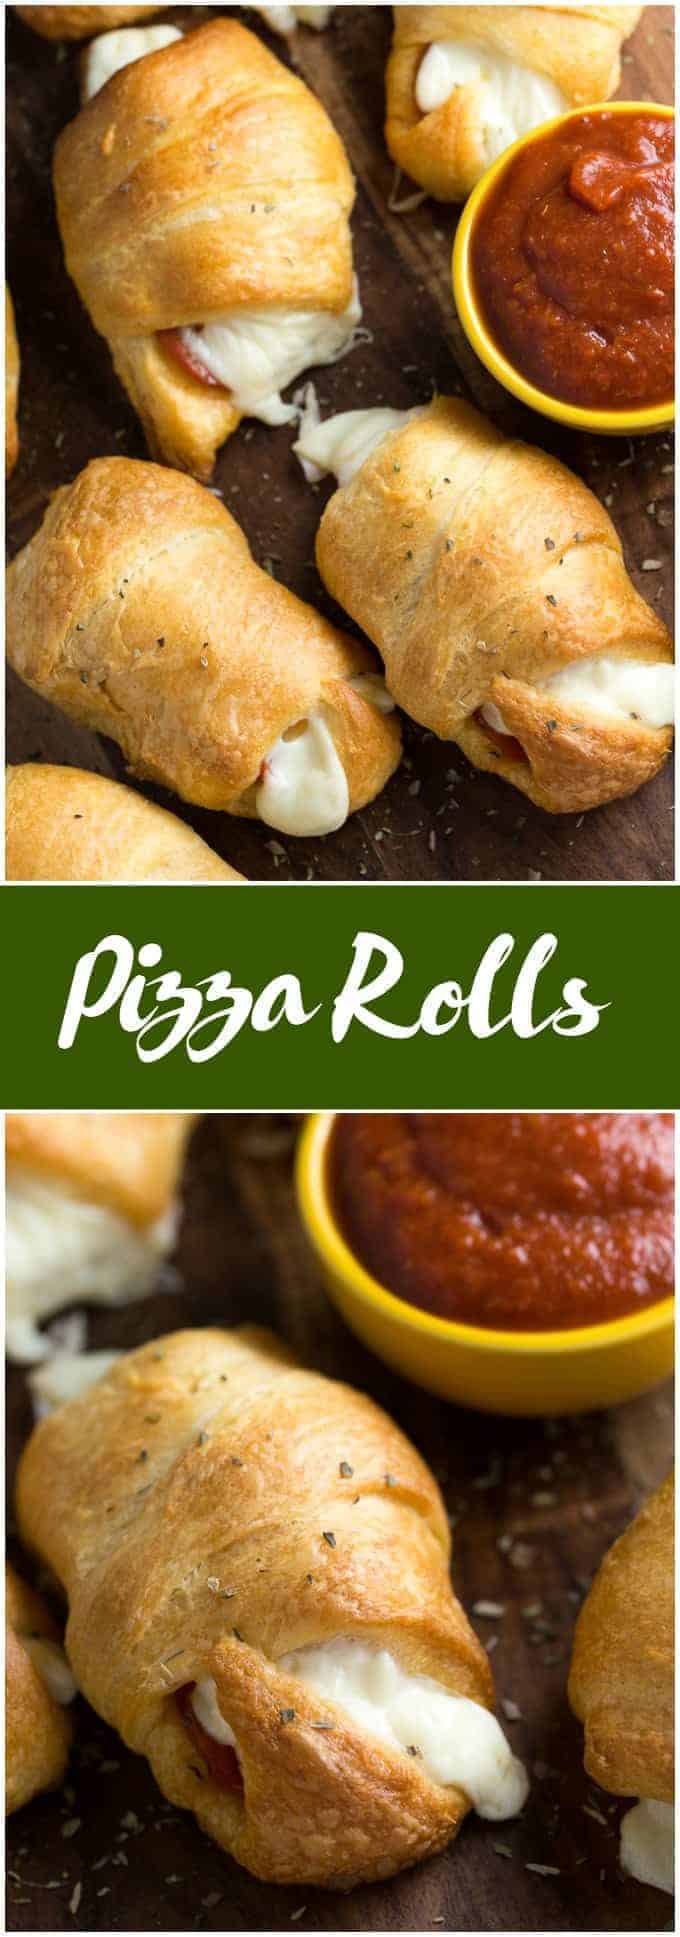 Pizza Rolls - Soft and buttery crescent rolls filled with gooey melted cheese and pepperoni slices. Add some pizza dipping sauce on the side and you have a tasty appetizer kids love!